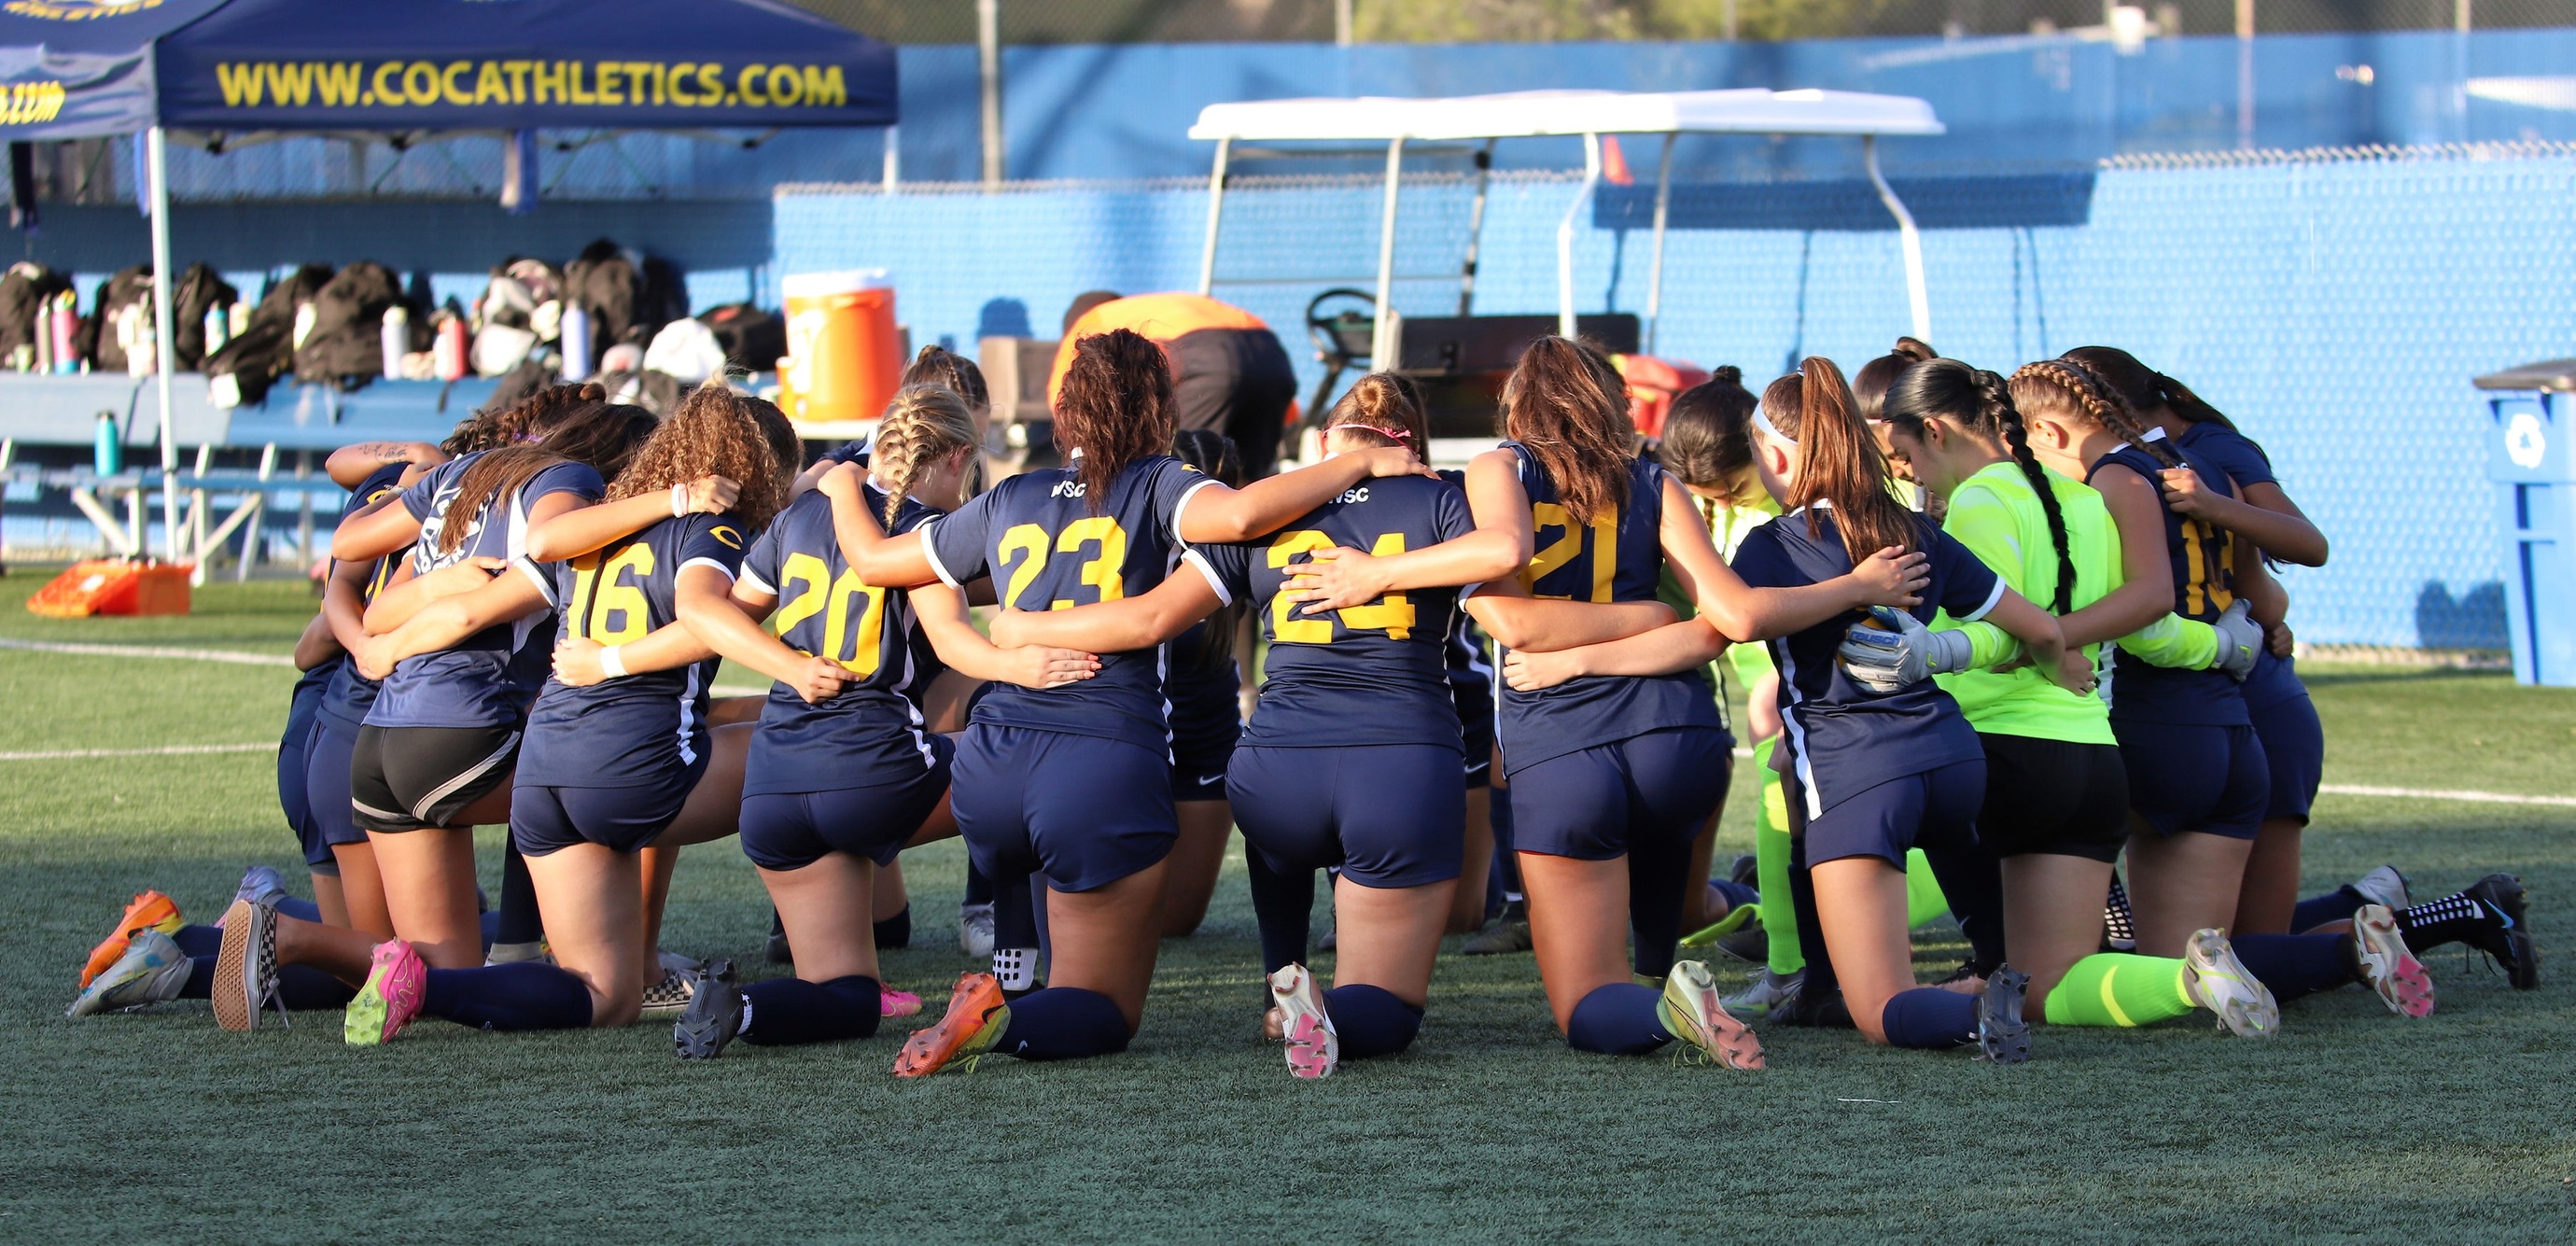 Stock image of the College of the Canyons women's soccer team kneeling in a huddle.